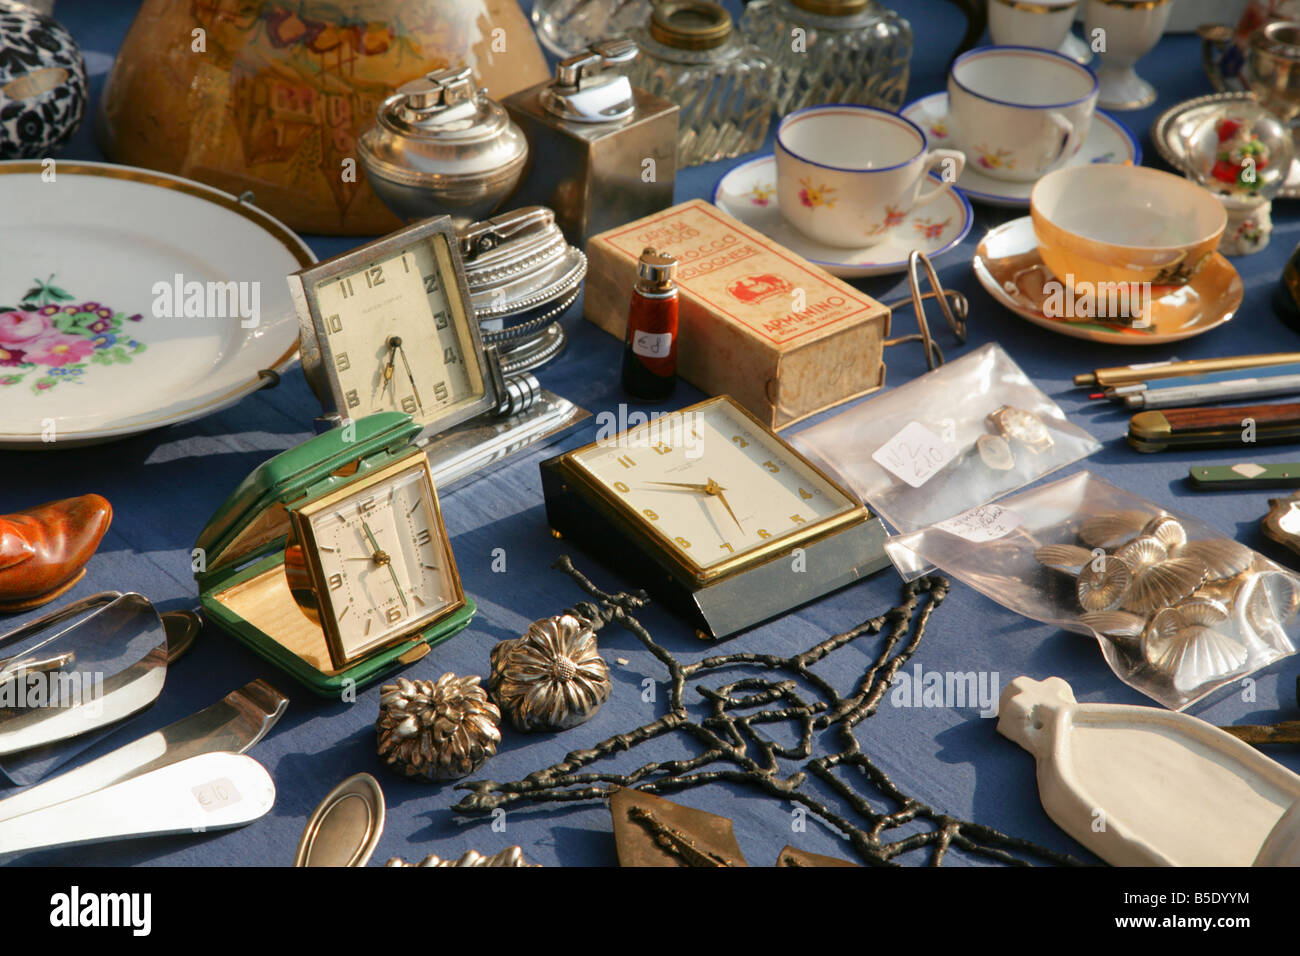 Alarm clocks and miscellaneous items on sale at stall in Bologna Antiques market, Italy. Stock Photo